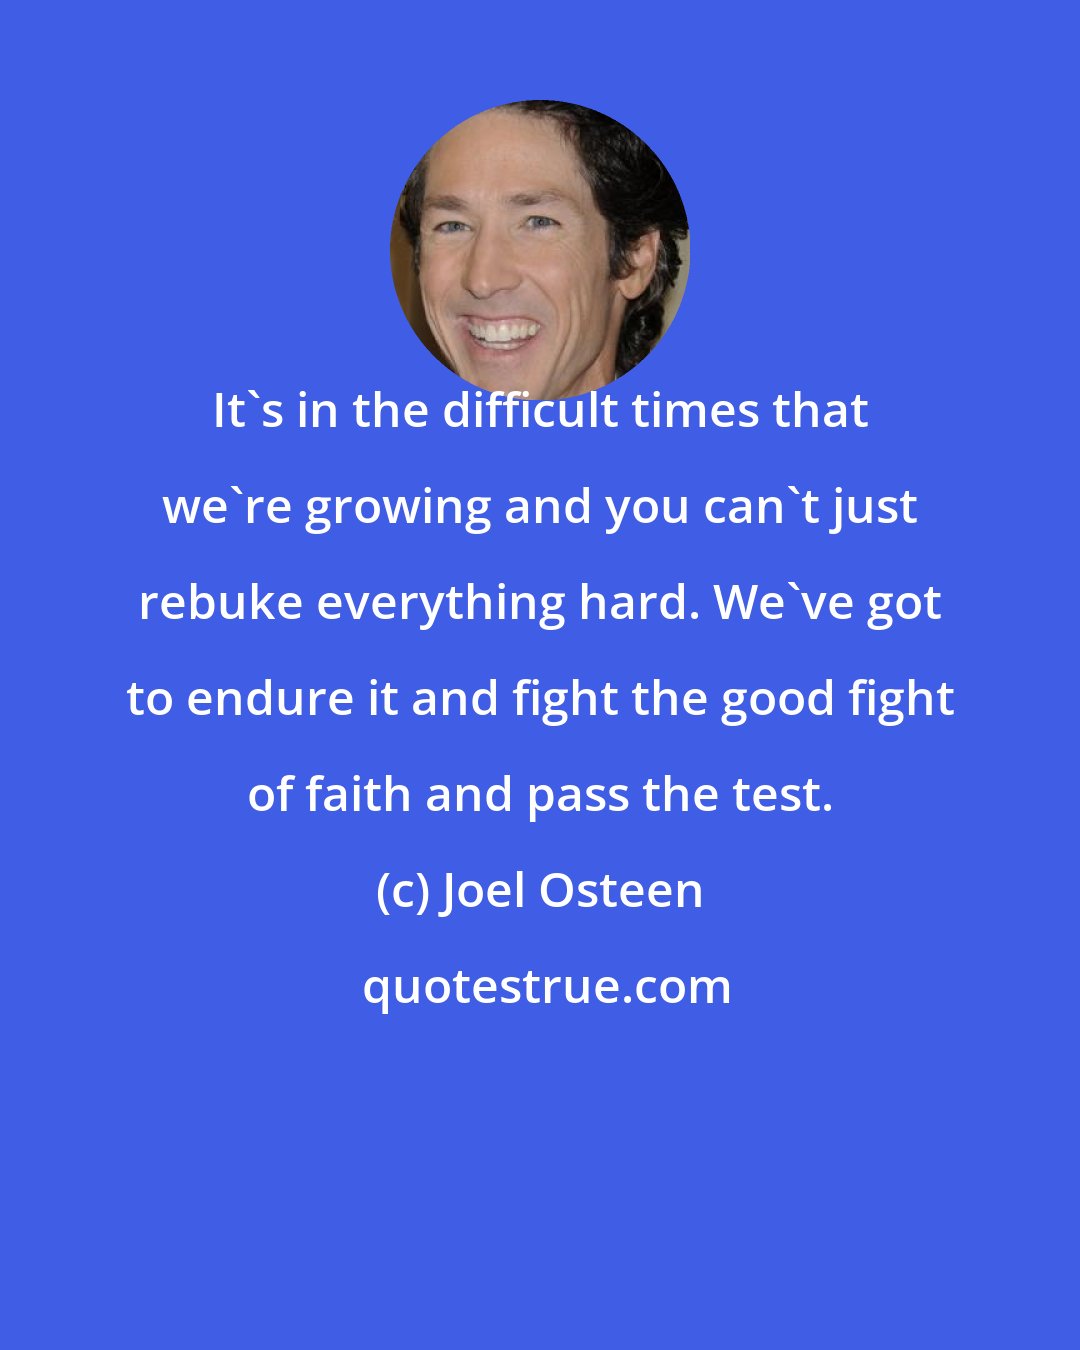 Joel Osteen: It's in the difficult times that we're growing and you can't just rebuke everything hard. We've got to endure it and fight the good fight of faith and pass the test.